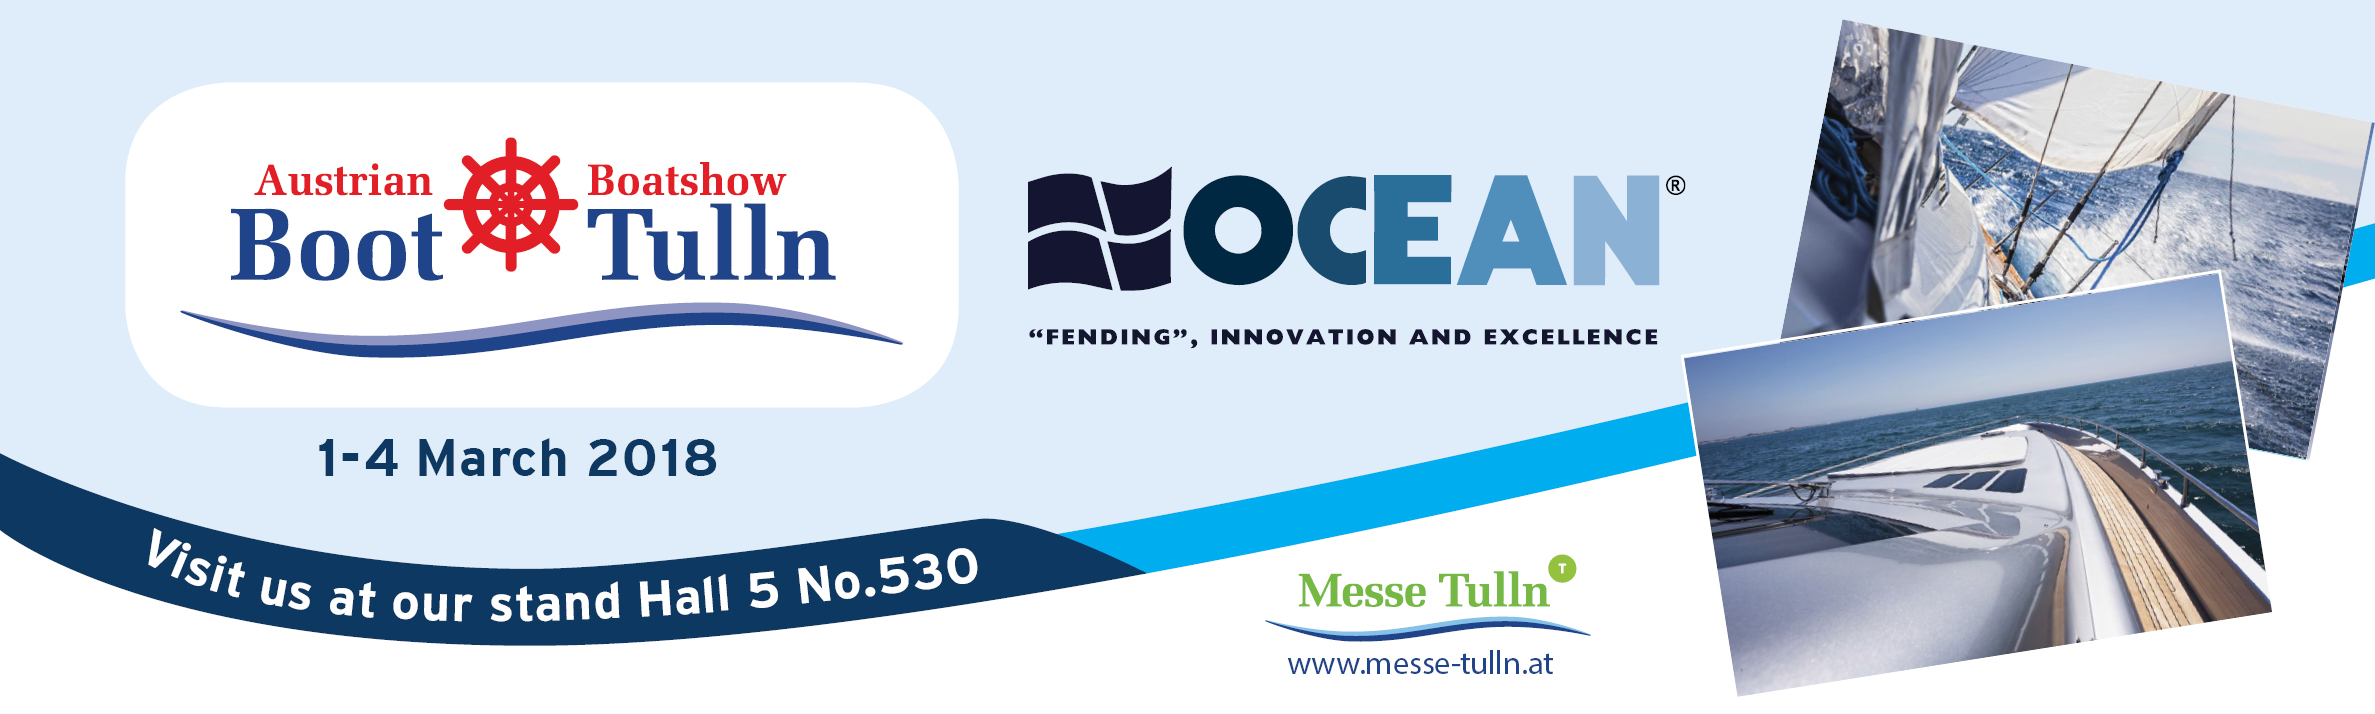 OCEAN at BOOT TULLN 2018 on 1-4 March 2018